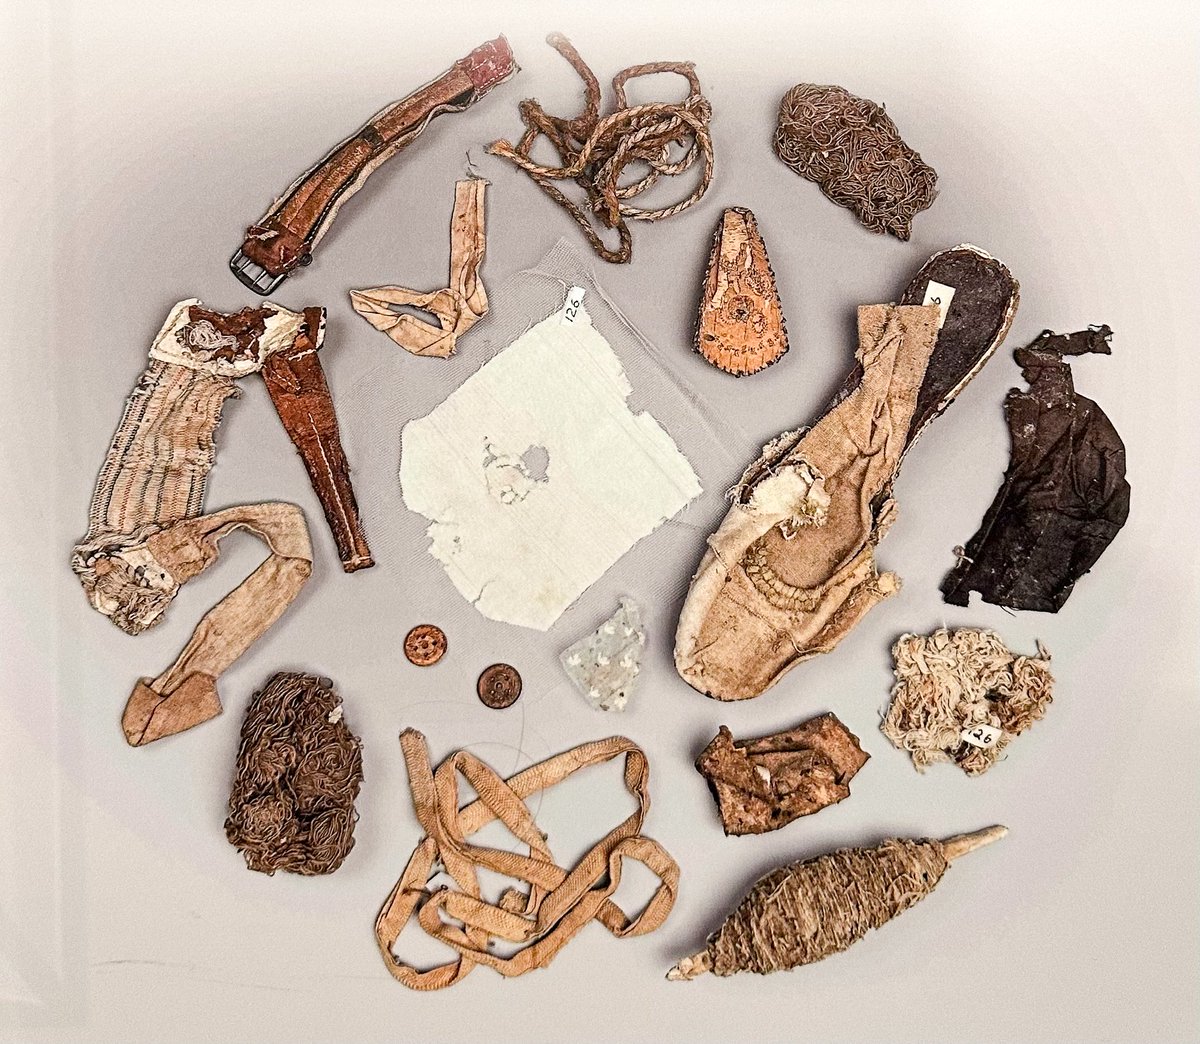 In 1949, preservation staff removed a rat's nest from behind a wall in the Washingtons' bedchamber. ⁣The rat had collected materials from different eras, including a woman's shoe, rope, and a small scrap of white cotton dimity fabric used in the Washingtons' bed curtains. 🐀